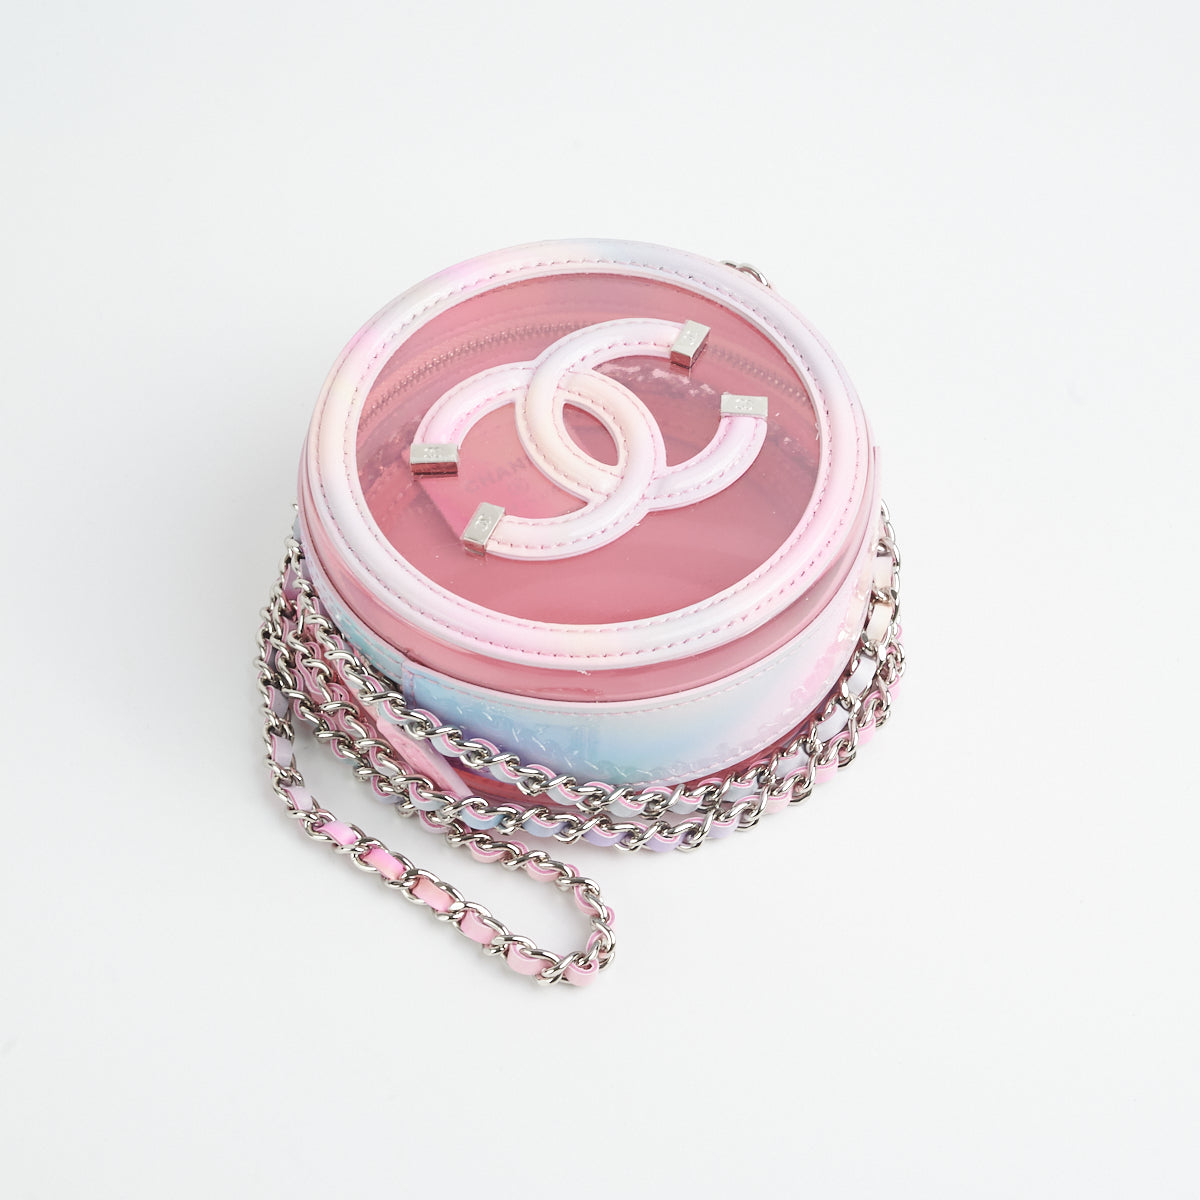 Chanel PVC Round Filigree Clutch on Chain Translucent Pink  THE PURSE  AFFAIR